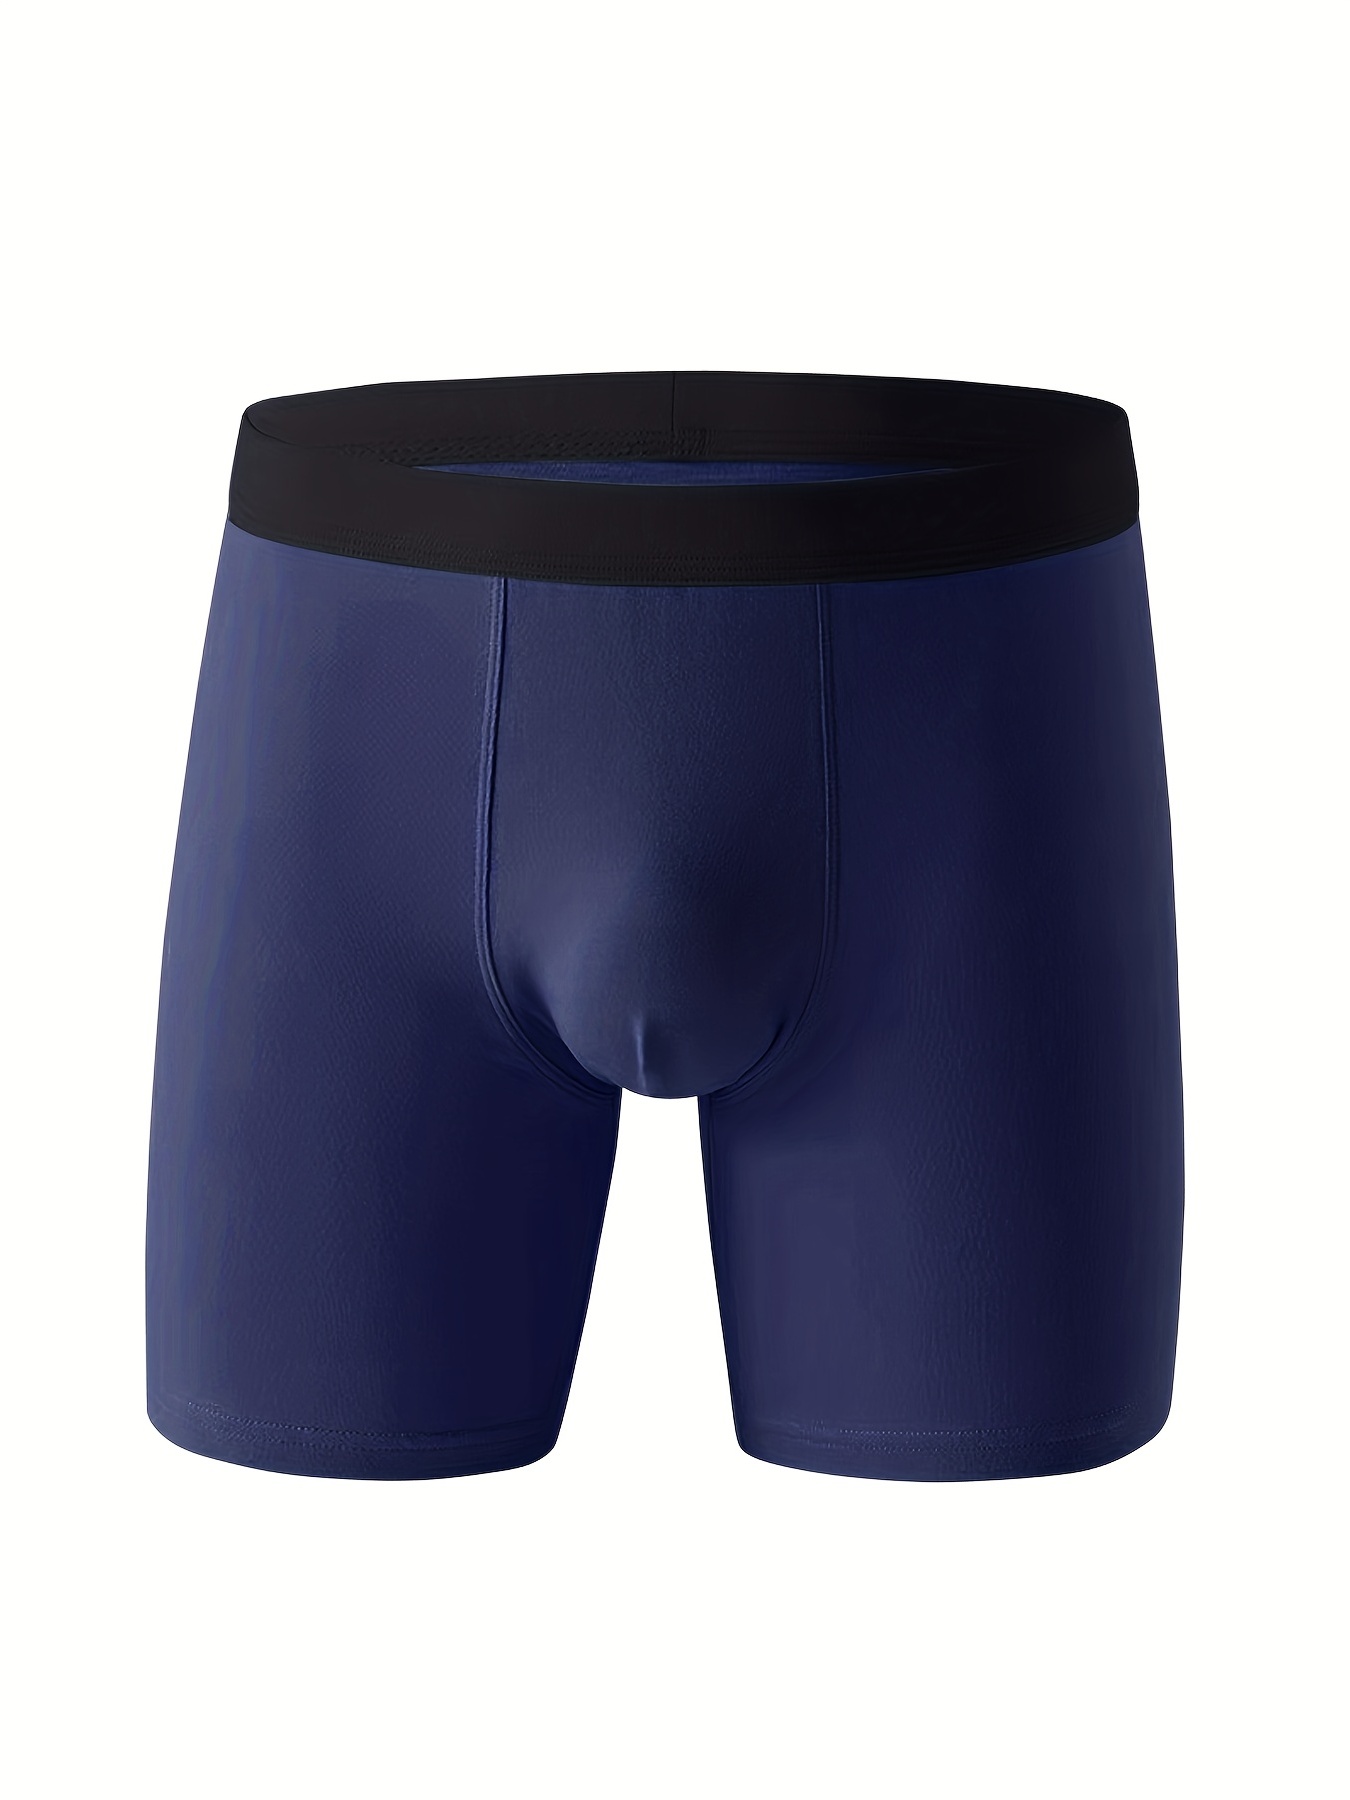 Mens Cotton Boxer Set With Long Legs And Sexy Compression Shorts Men  L220809 From Qiaomaidou01, $33.26